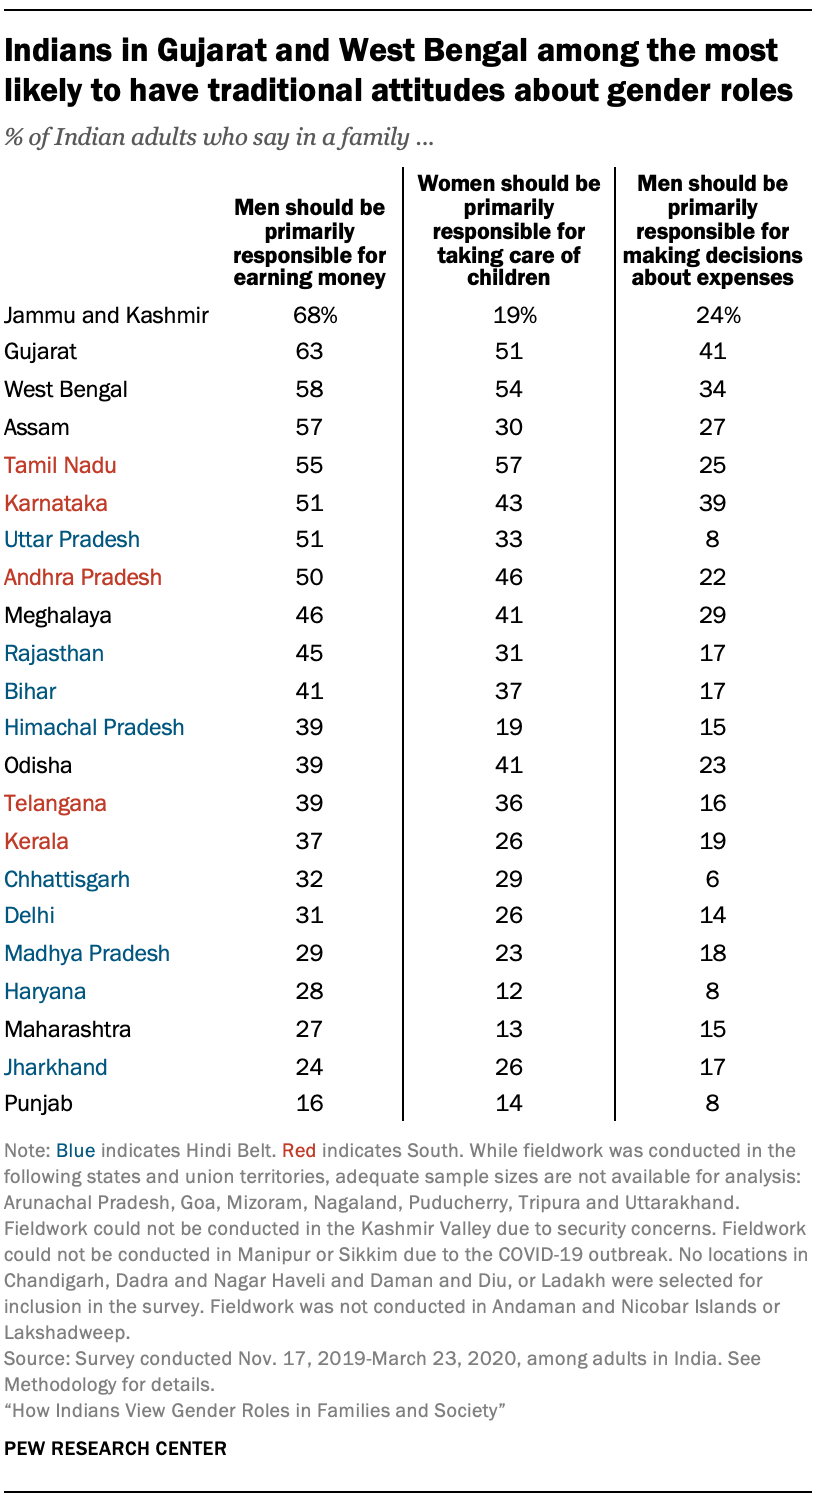 Indians in Gujarat and West Bengal among the most likely to have traditional attitudes about gender roles